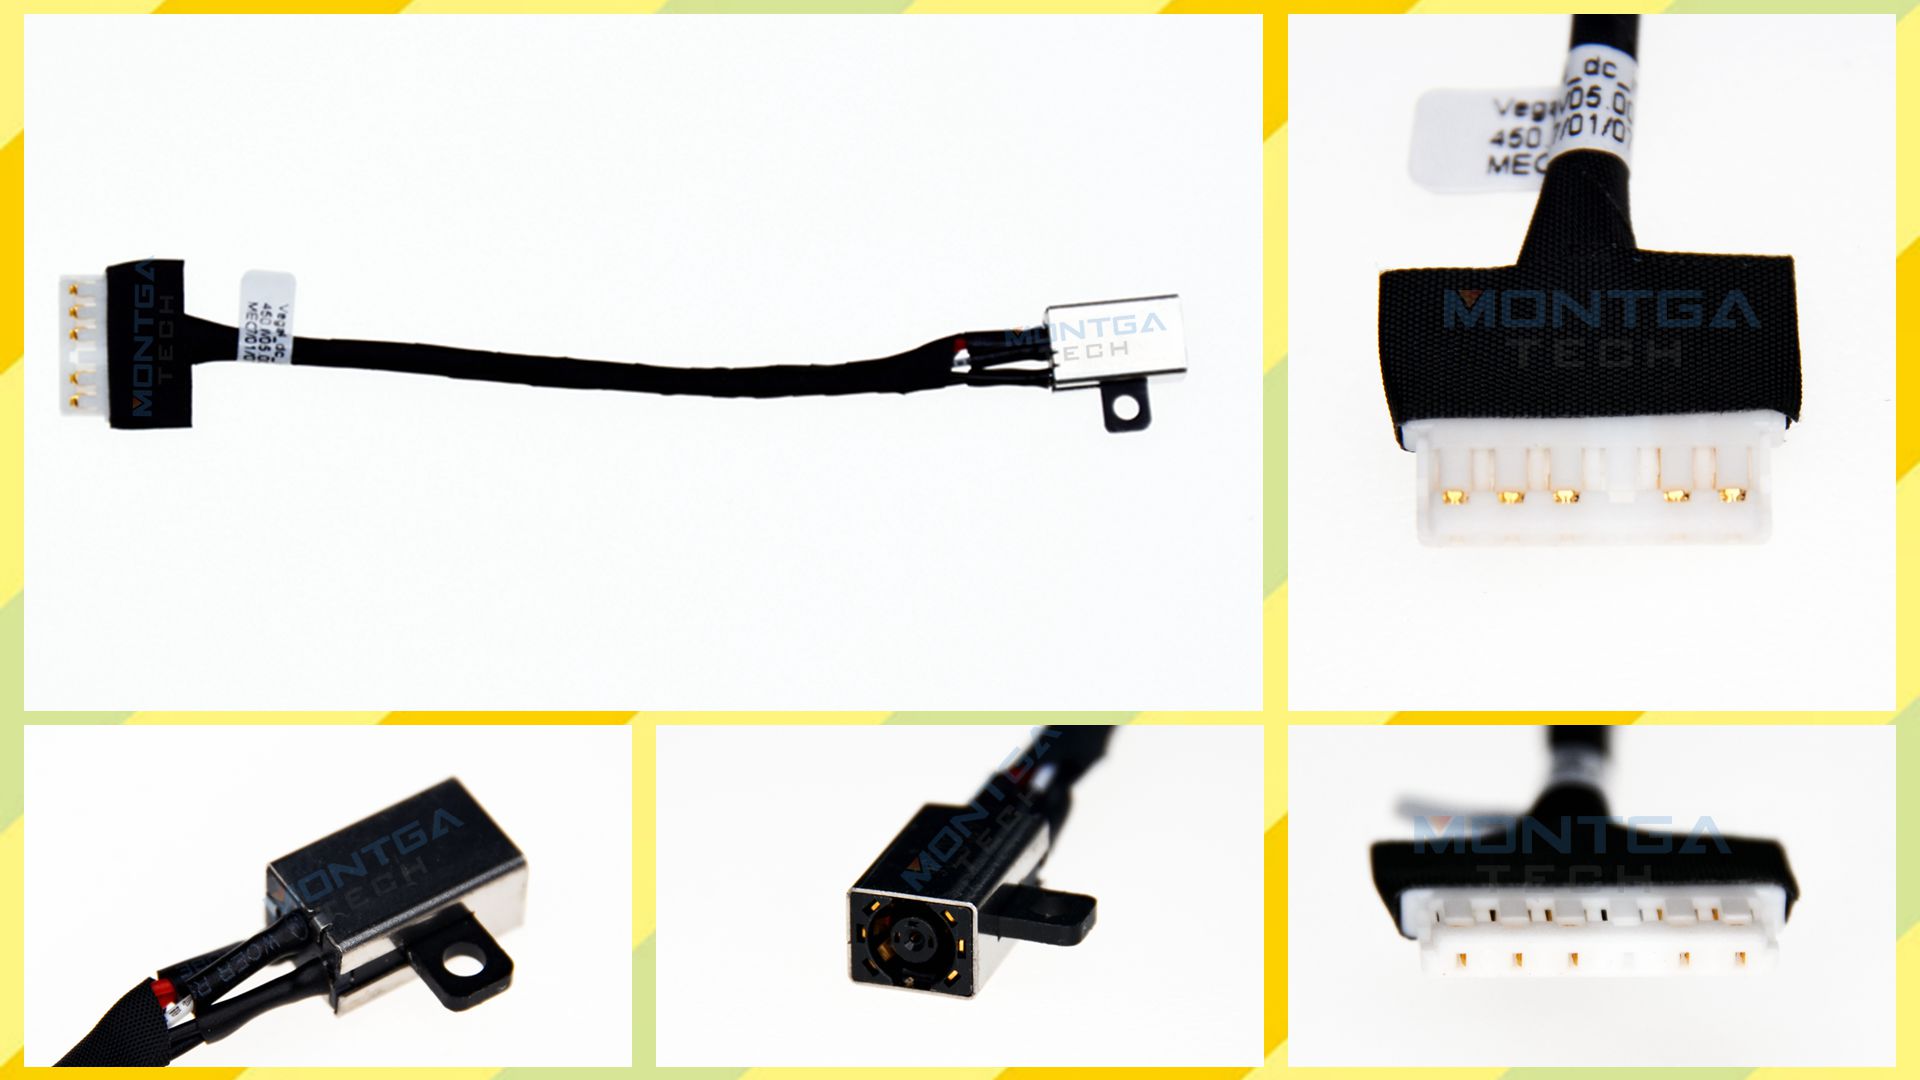 Dell 3000 Series charging connector, Dell 3000 Series DC Power Jack, Dell 3000 Series DC IN Cable, Dell 3000 Series Power Jack, Dell 3000 Series plug, Dell 3000 Series Jack socket, Dell 3000 Series connecteur de charge, 